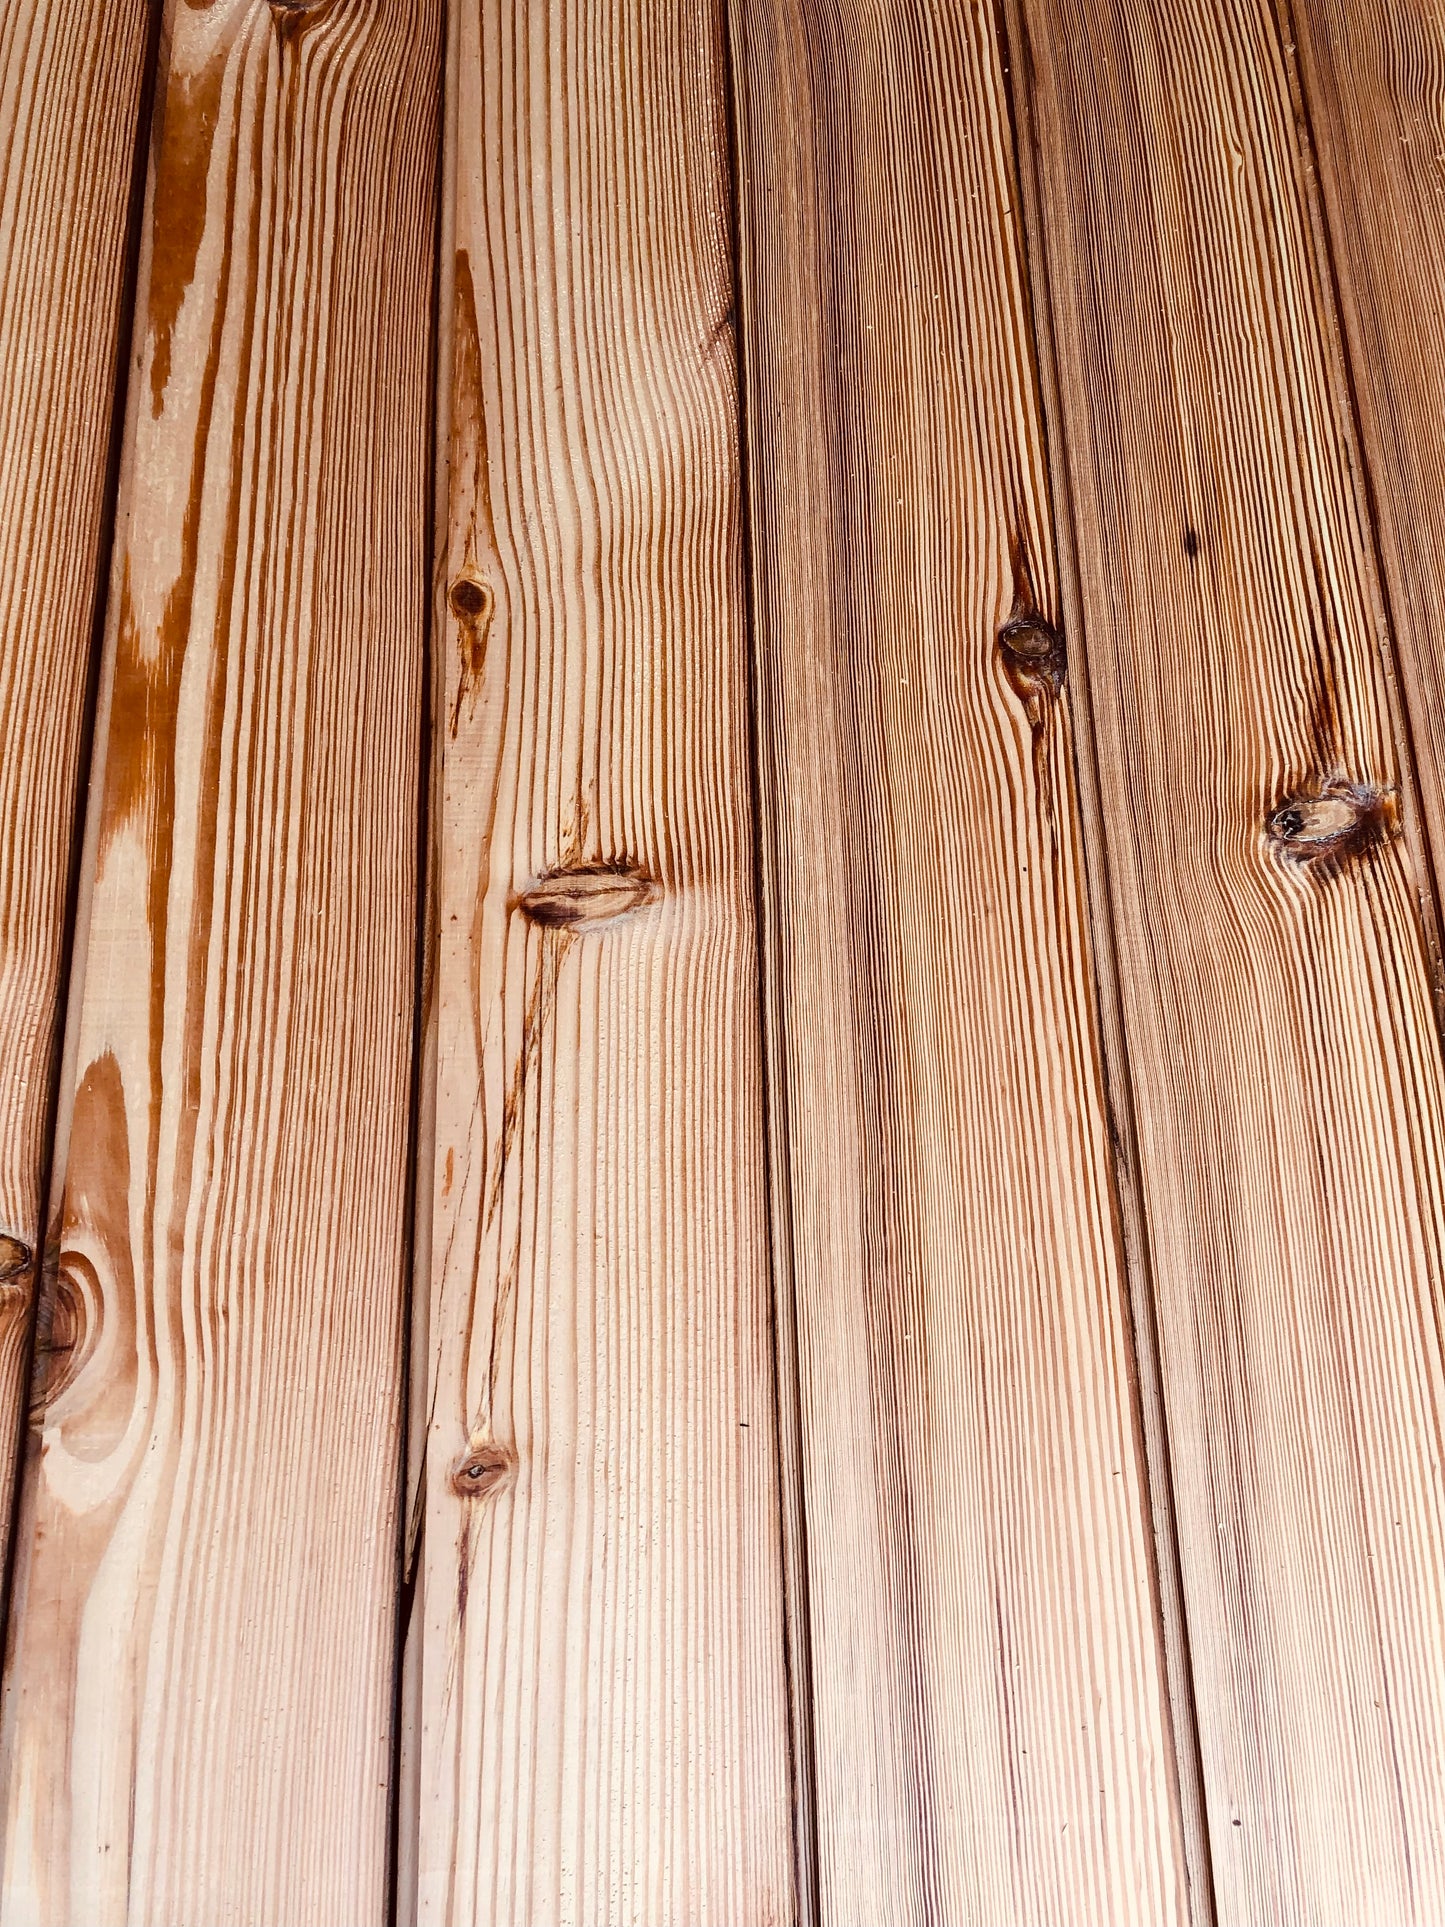 Laid pitch pine wooden flooring